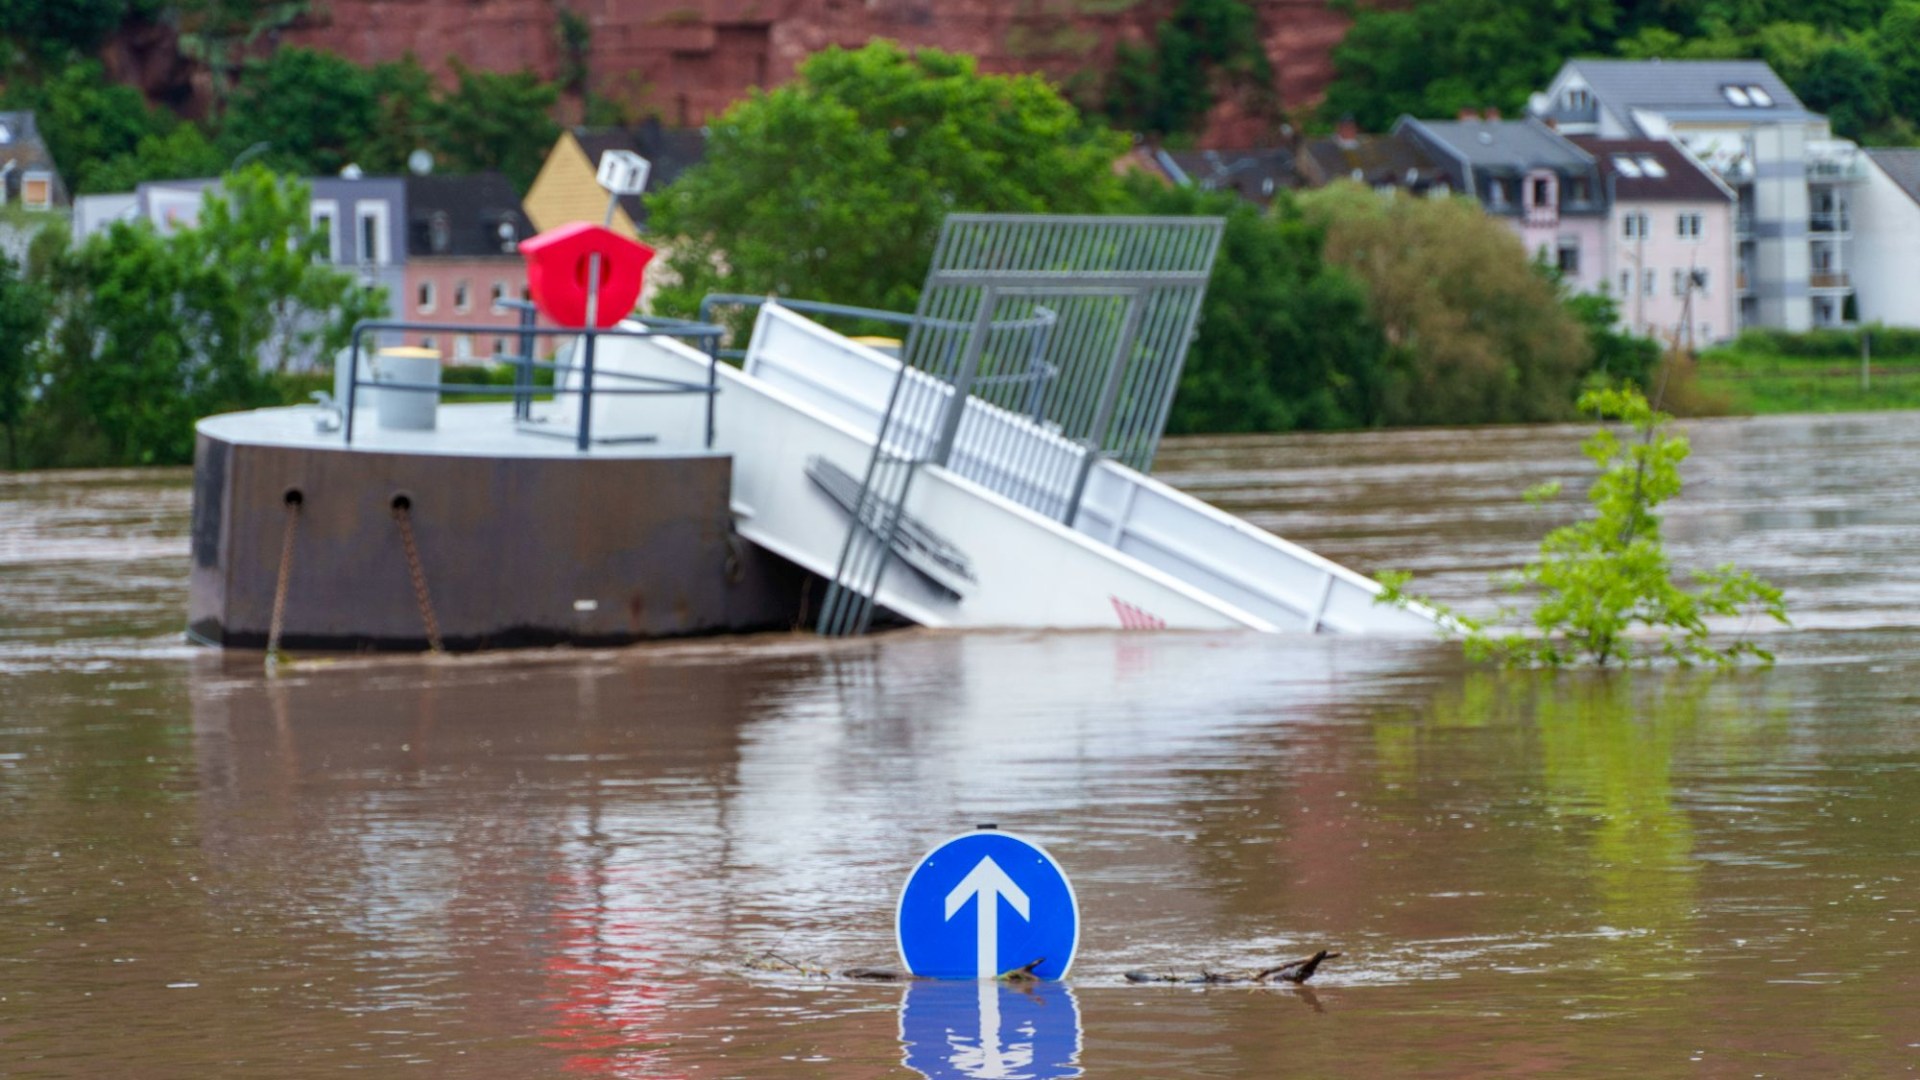 Devastating floods sweep German town turning roads into rivers as city sends out emergency alerts after heavy rain [Video]